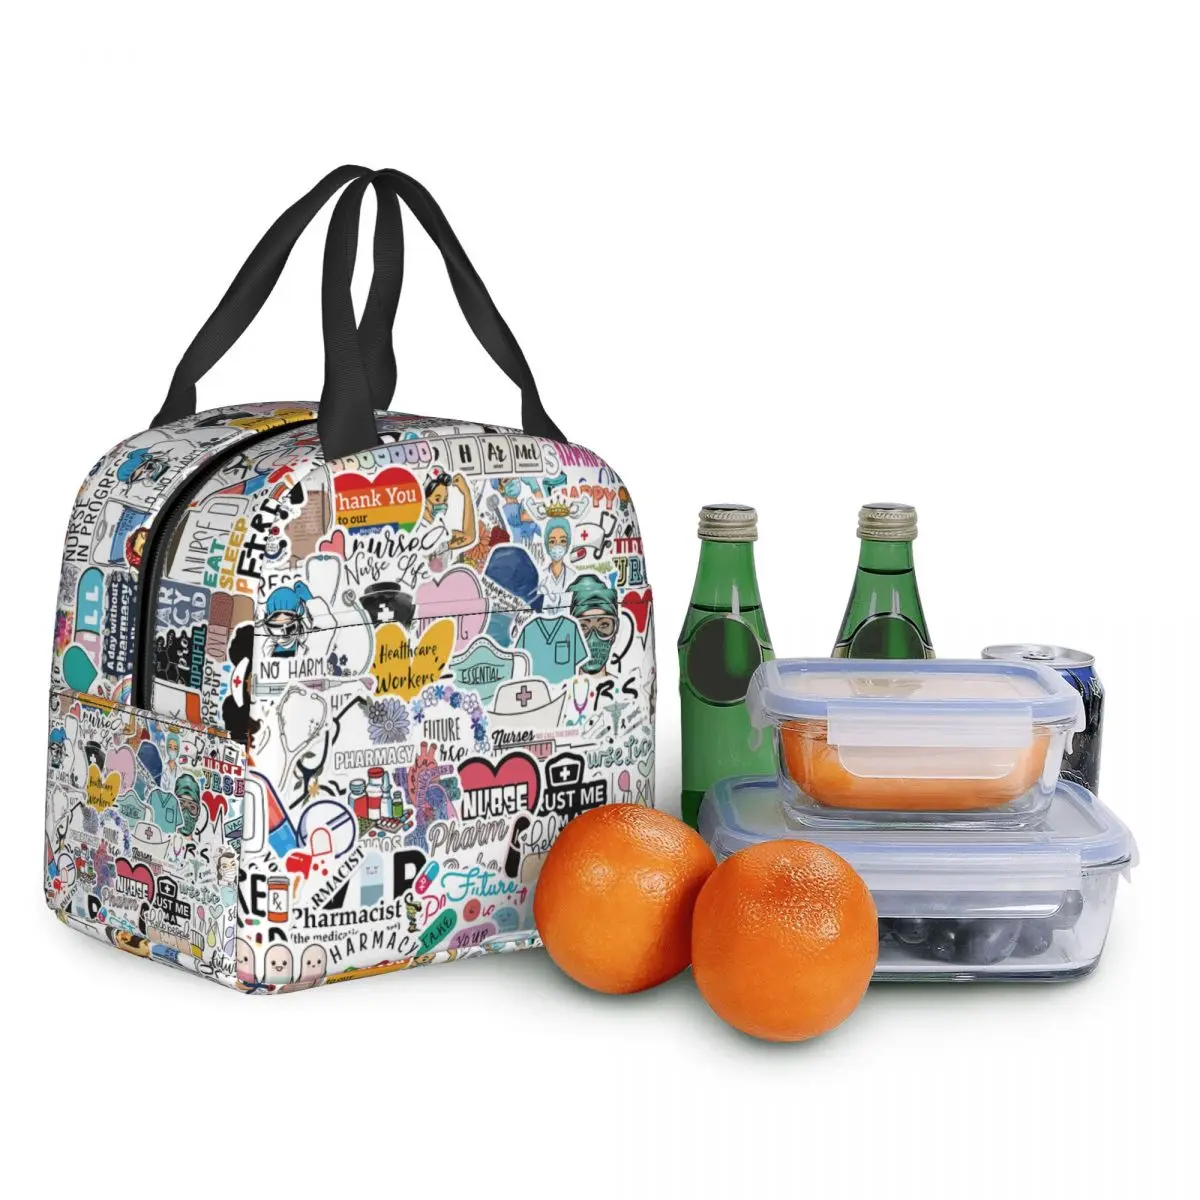 https://ae01.alicdn.com/kf/S108dba5202b74eb59b7021265ccf98d3v/Cartoon-Nursing-Nurse-Lunch-Bag-Resuable-Cooler-Warm-Thermal-Insulated-Lunch-Tote-Box-for-Women-Kids.jpg